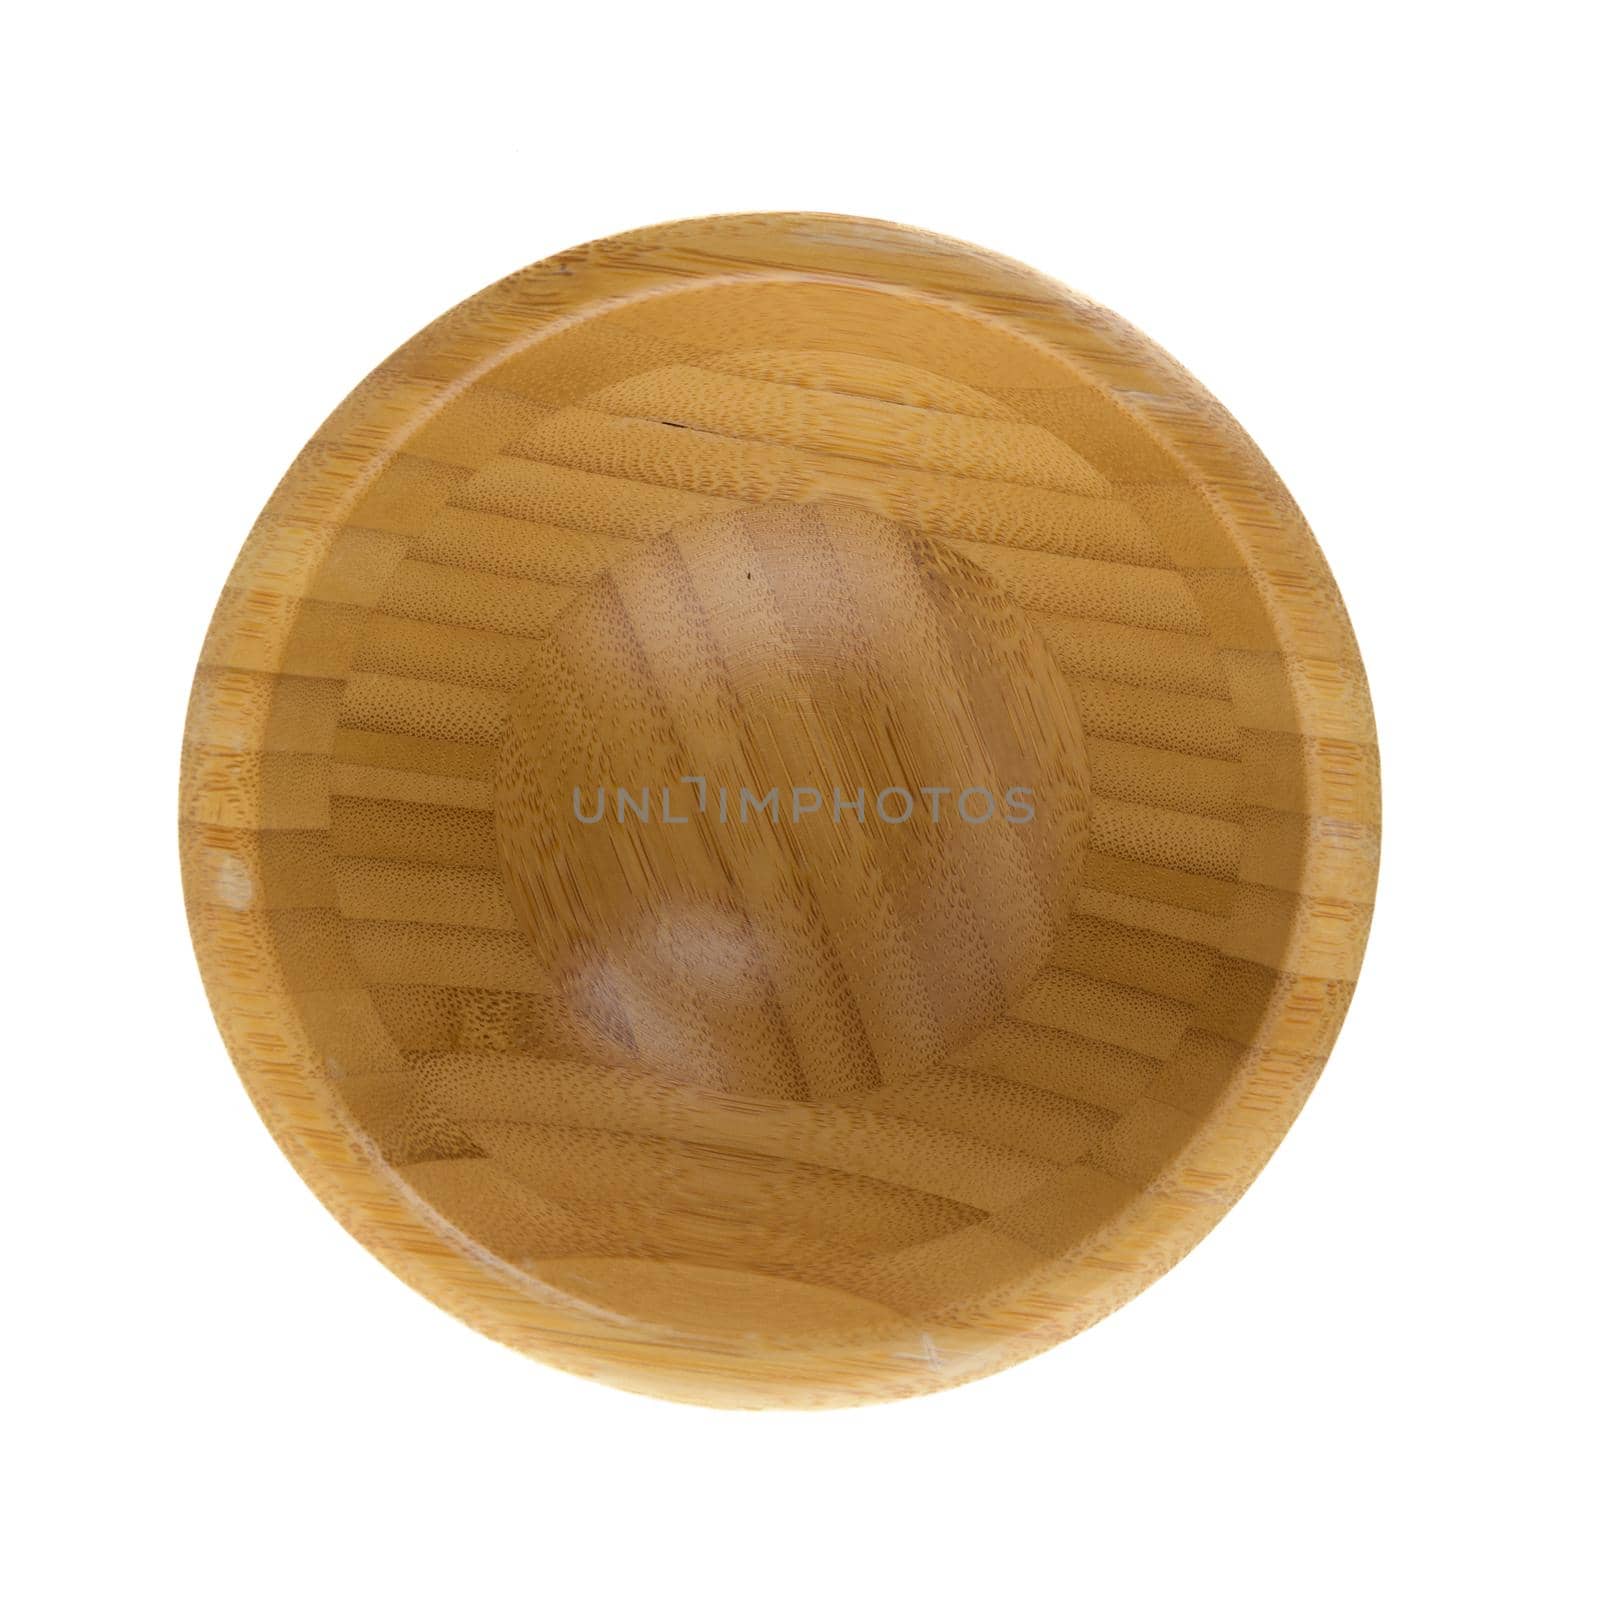 Wooden bowl by homydesign